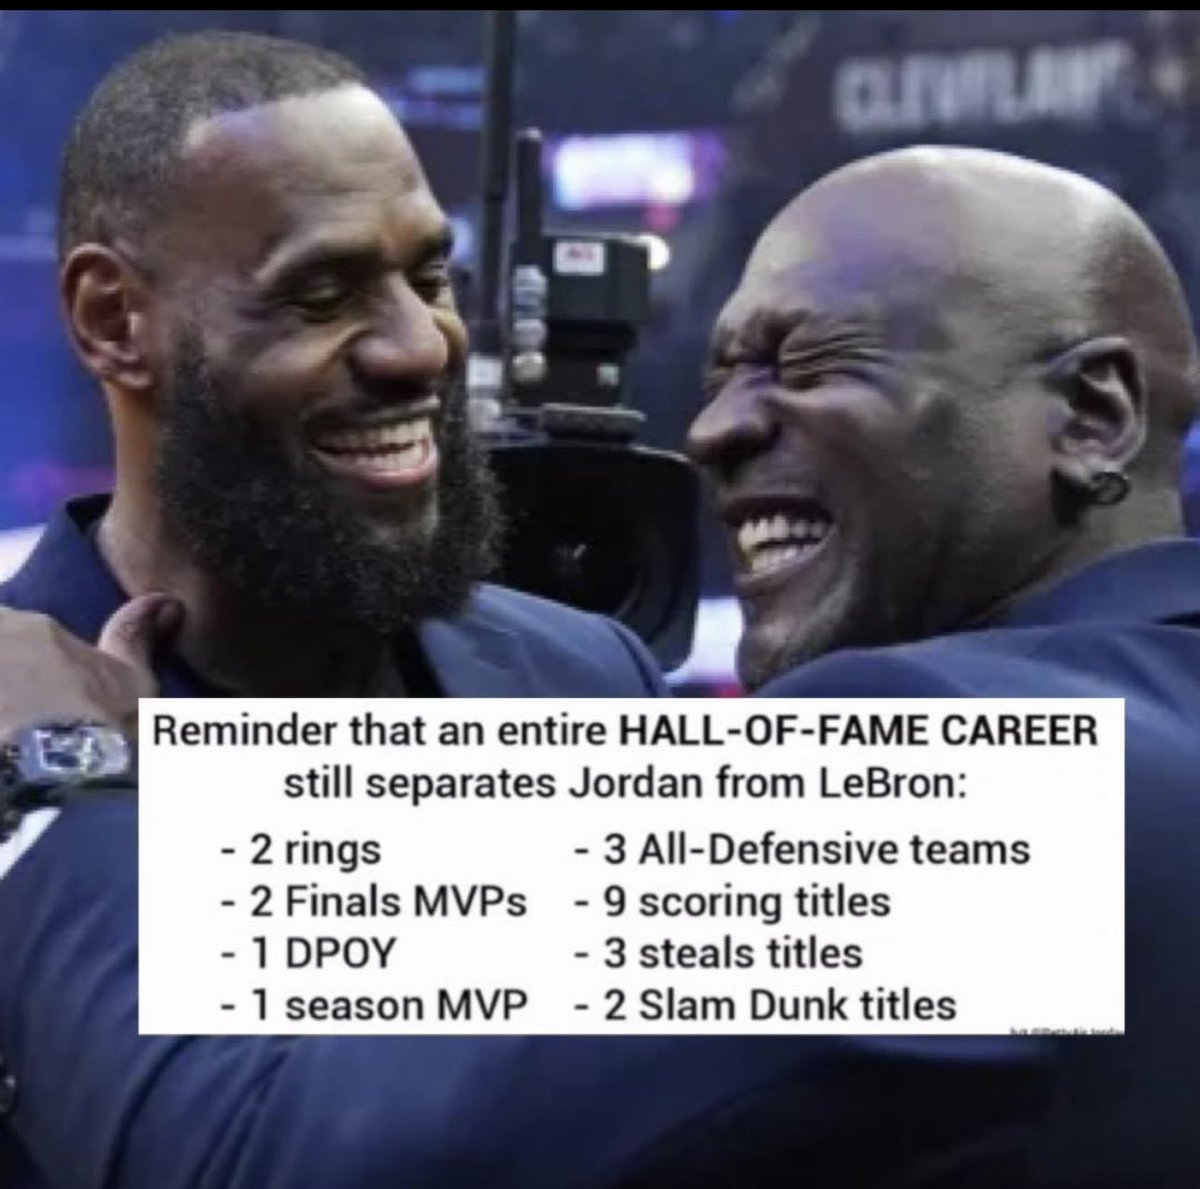 There’s an entire Hall of Fame resume separating #Bulls Michael Jordan & #Lakers LeBron James 💀